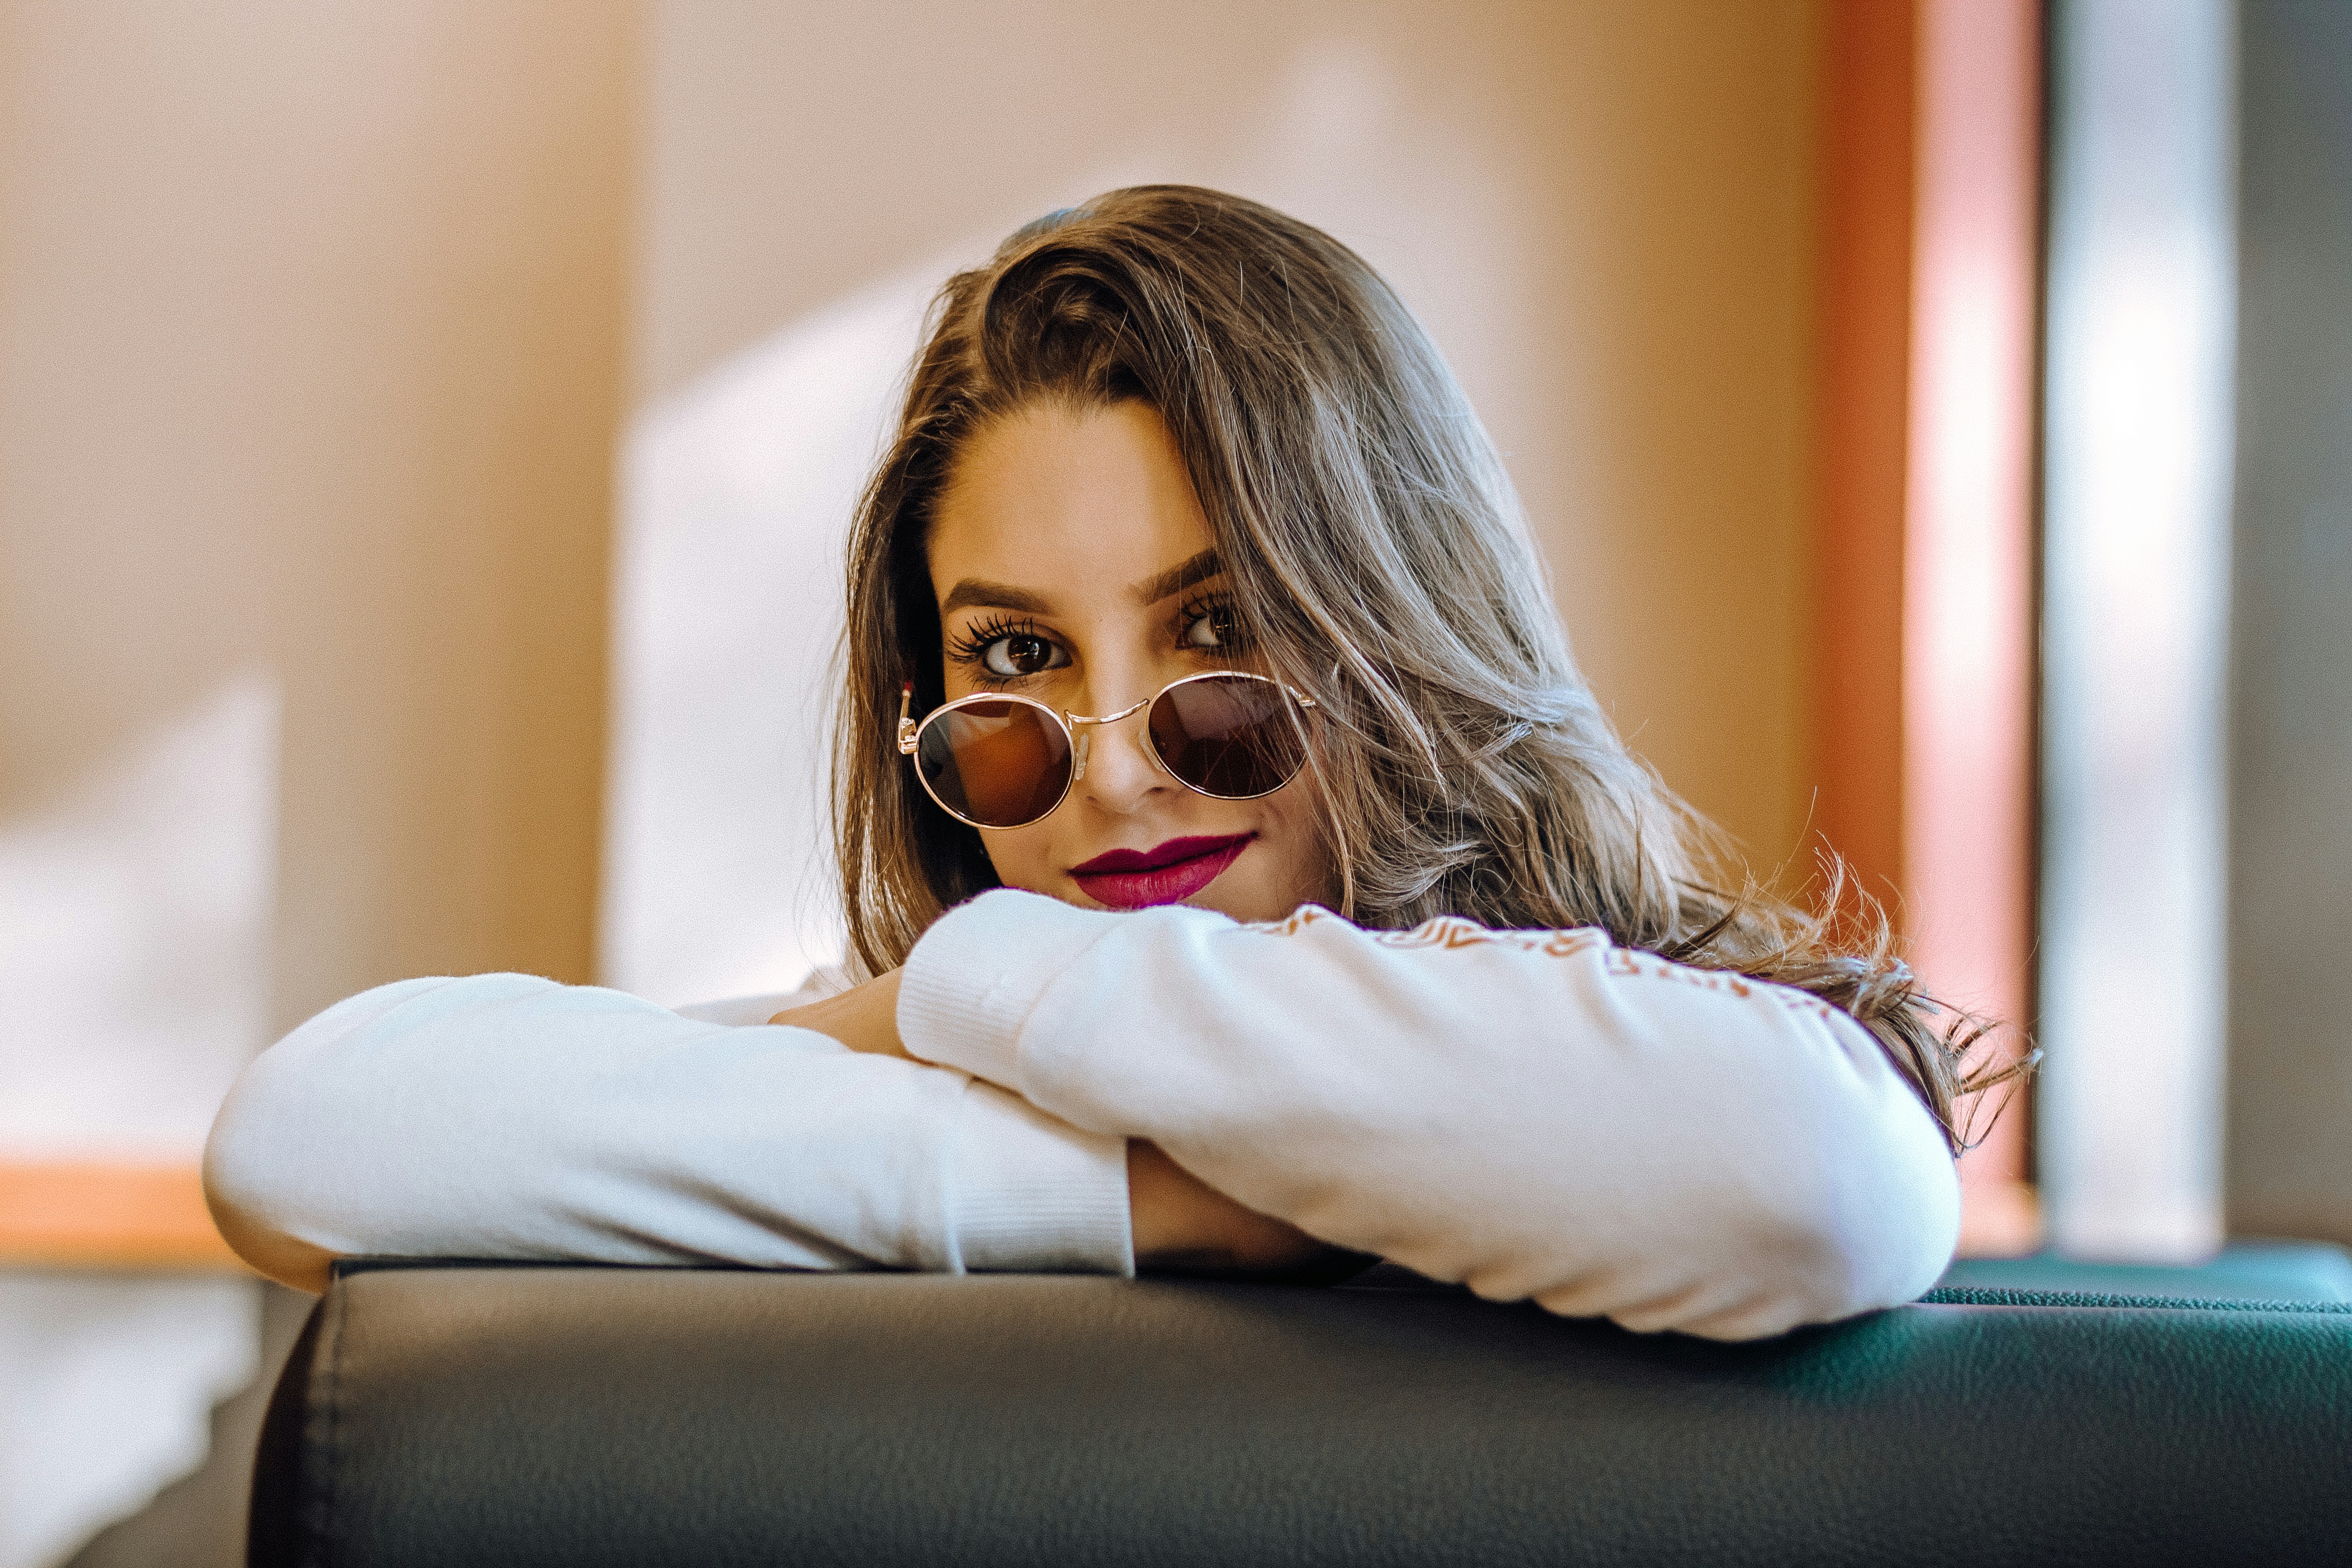 great photo recipe,how to photograph woman wearing sunglasses sitting on couch